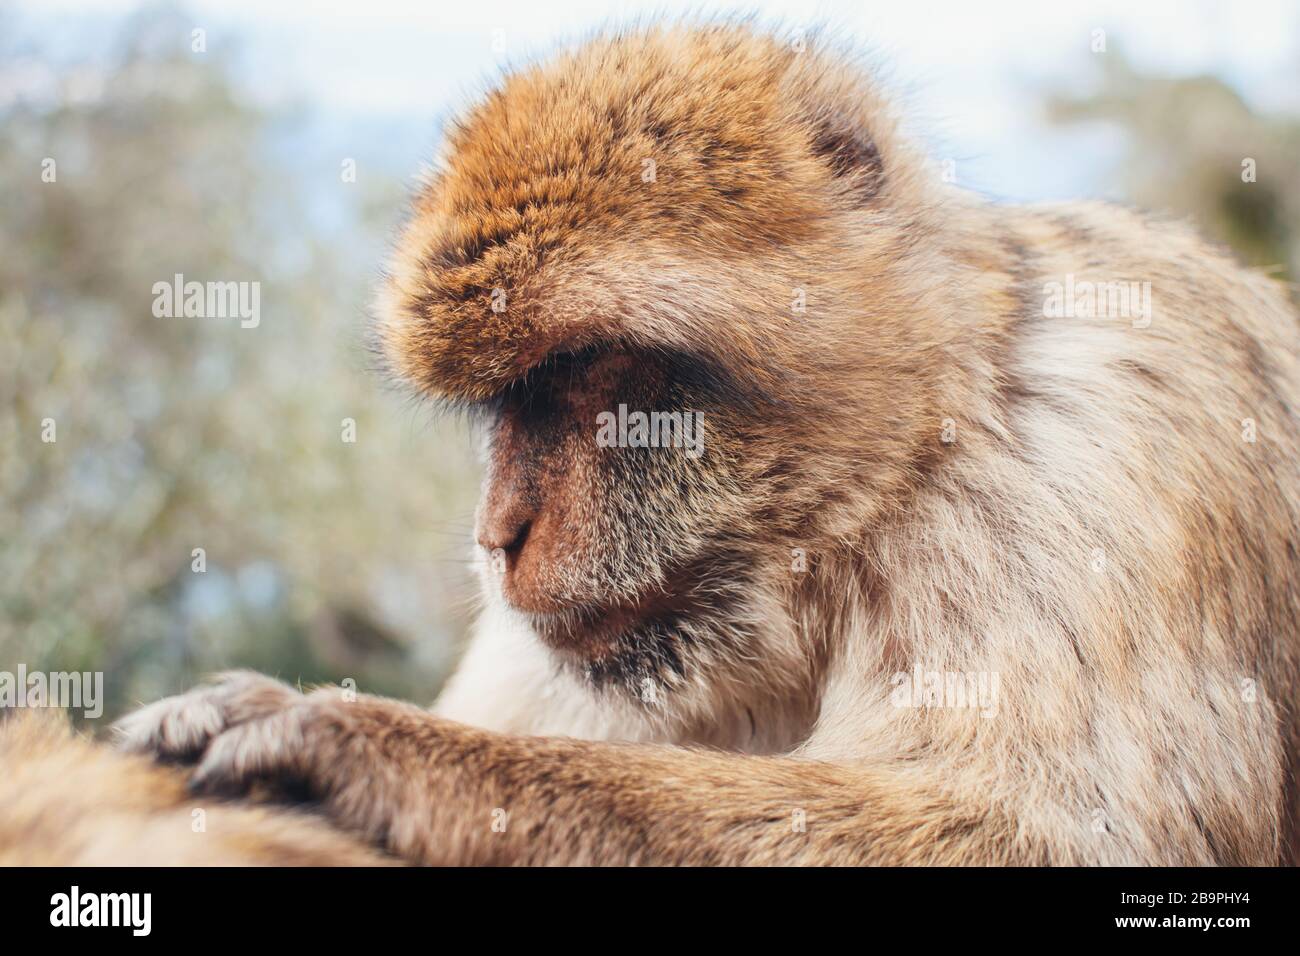 Wild monkey as Barbary Macaque sitting and grooming other monkey. Stock Photo